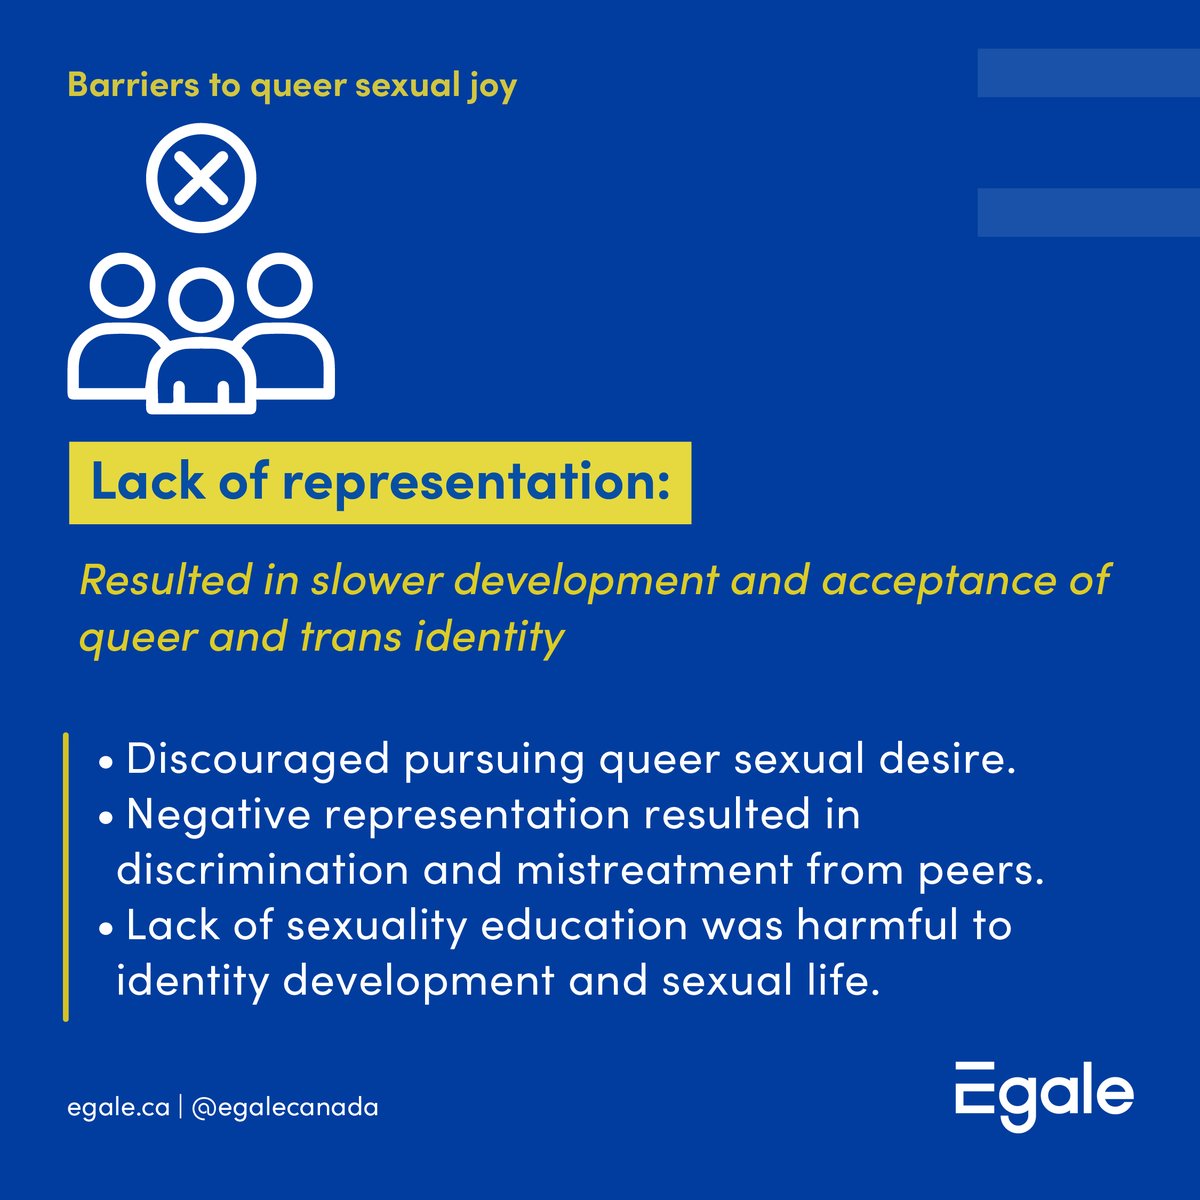 The report analyzes how these barriers are connected to oppressive systems and attitudes, including transphobia, homophobia, sexism, racism, ableism, classism, and dominant sexual culture (cisheteronormativity/cisheteropatriarchy). Read the full report: egale.ca/awareness/qsj/